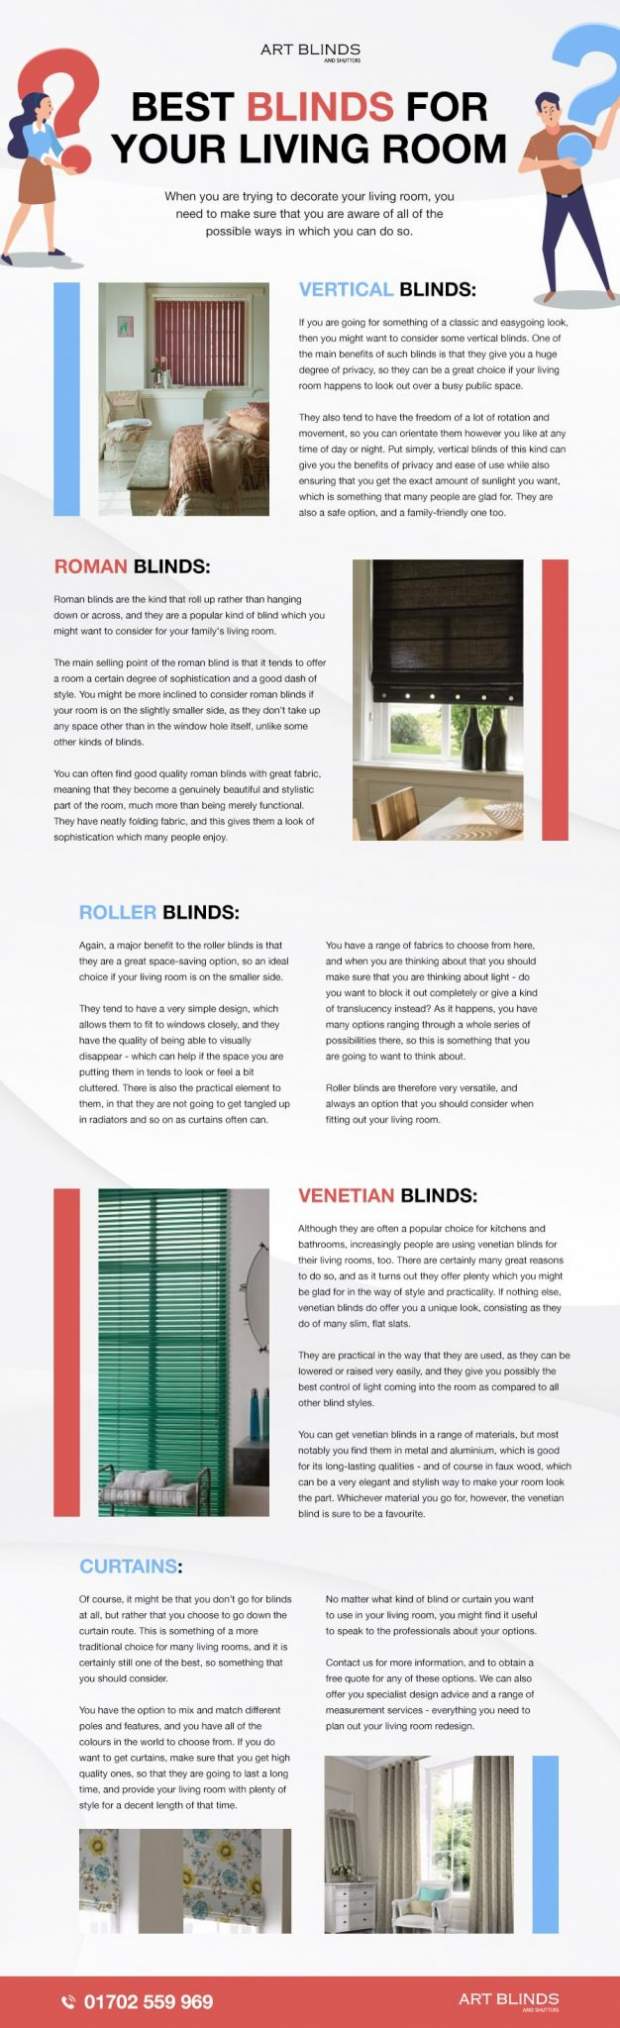 Best Blinds For Your Living Room